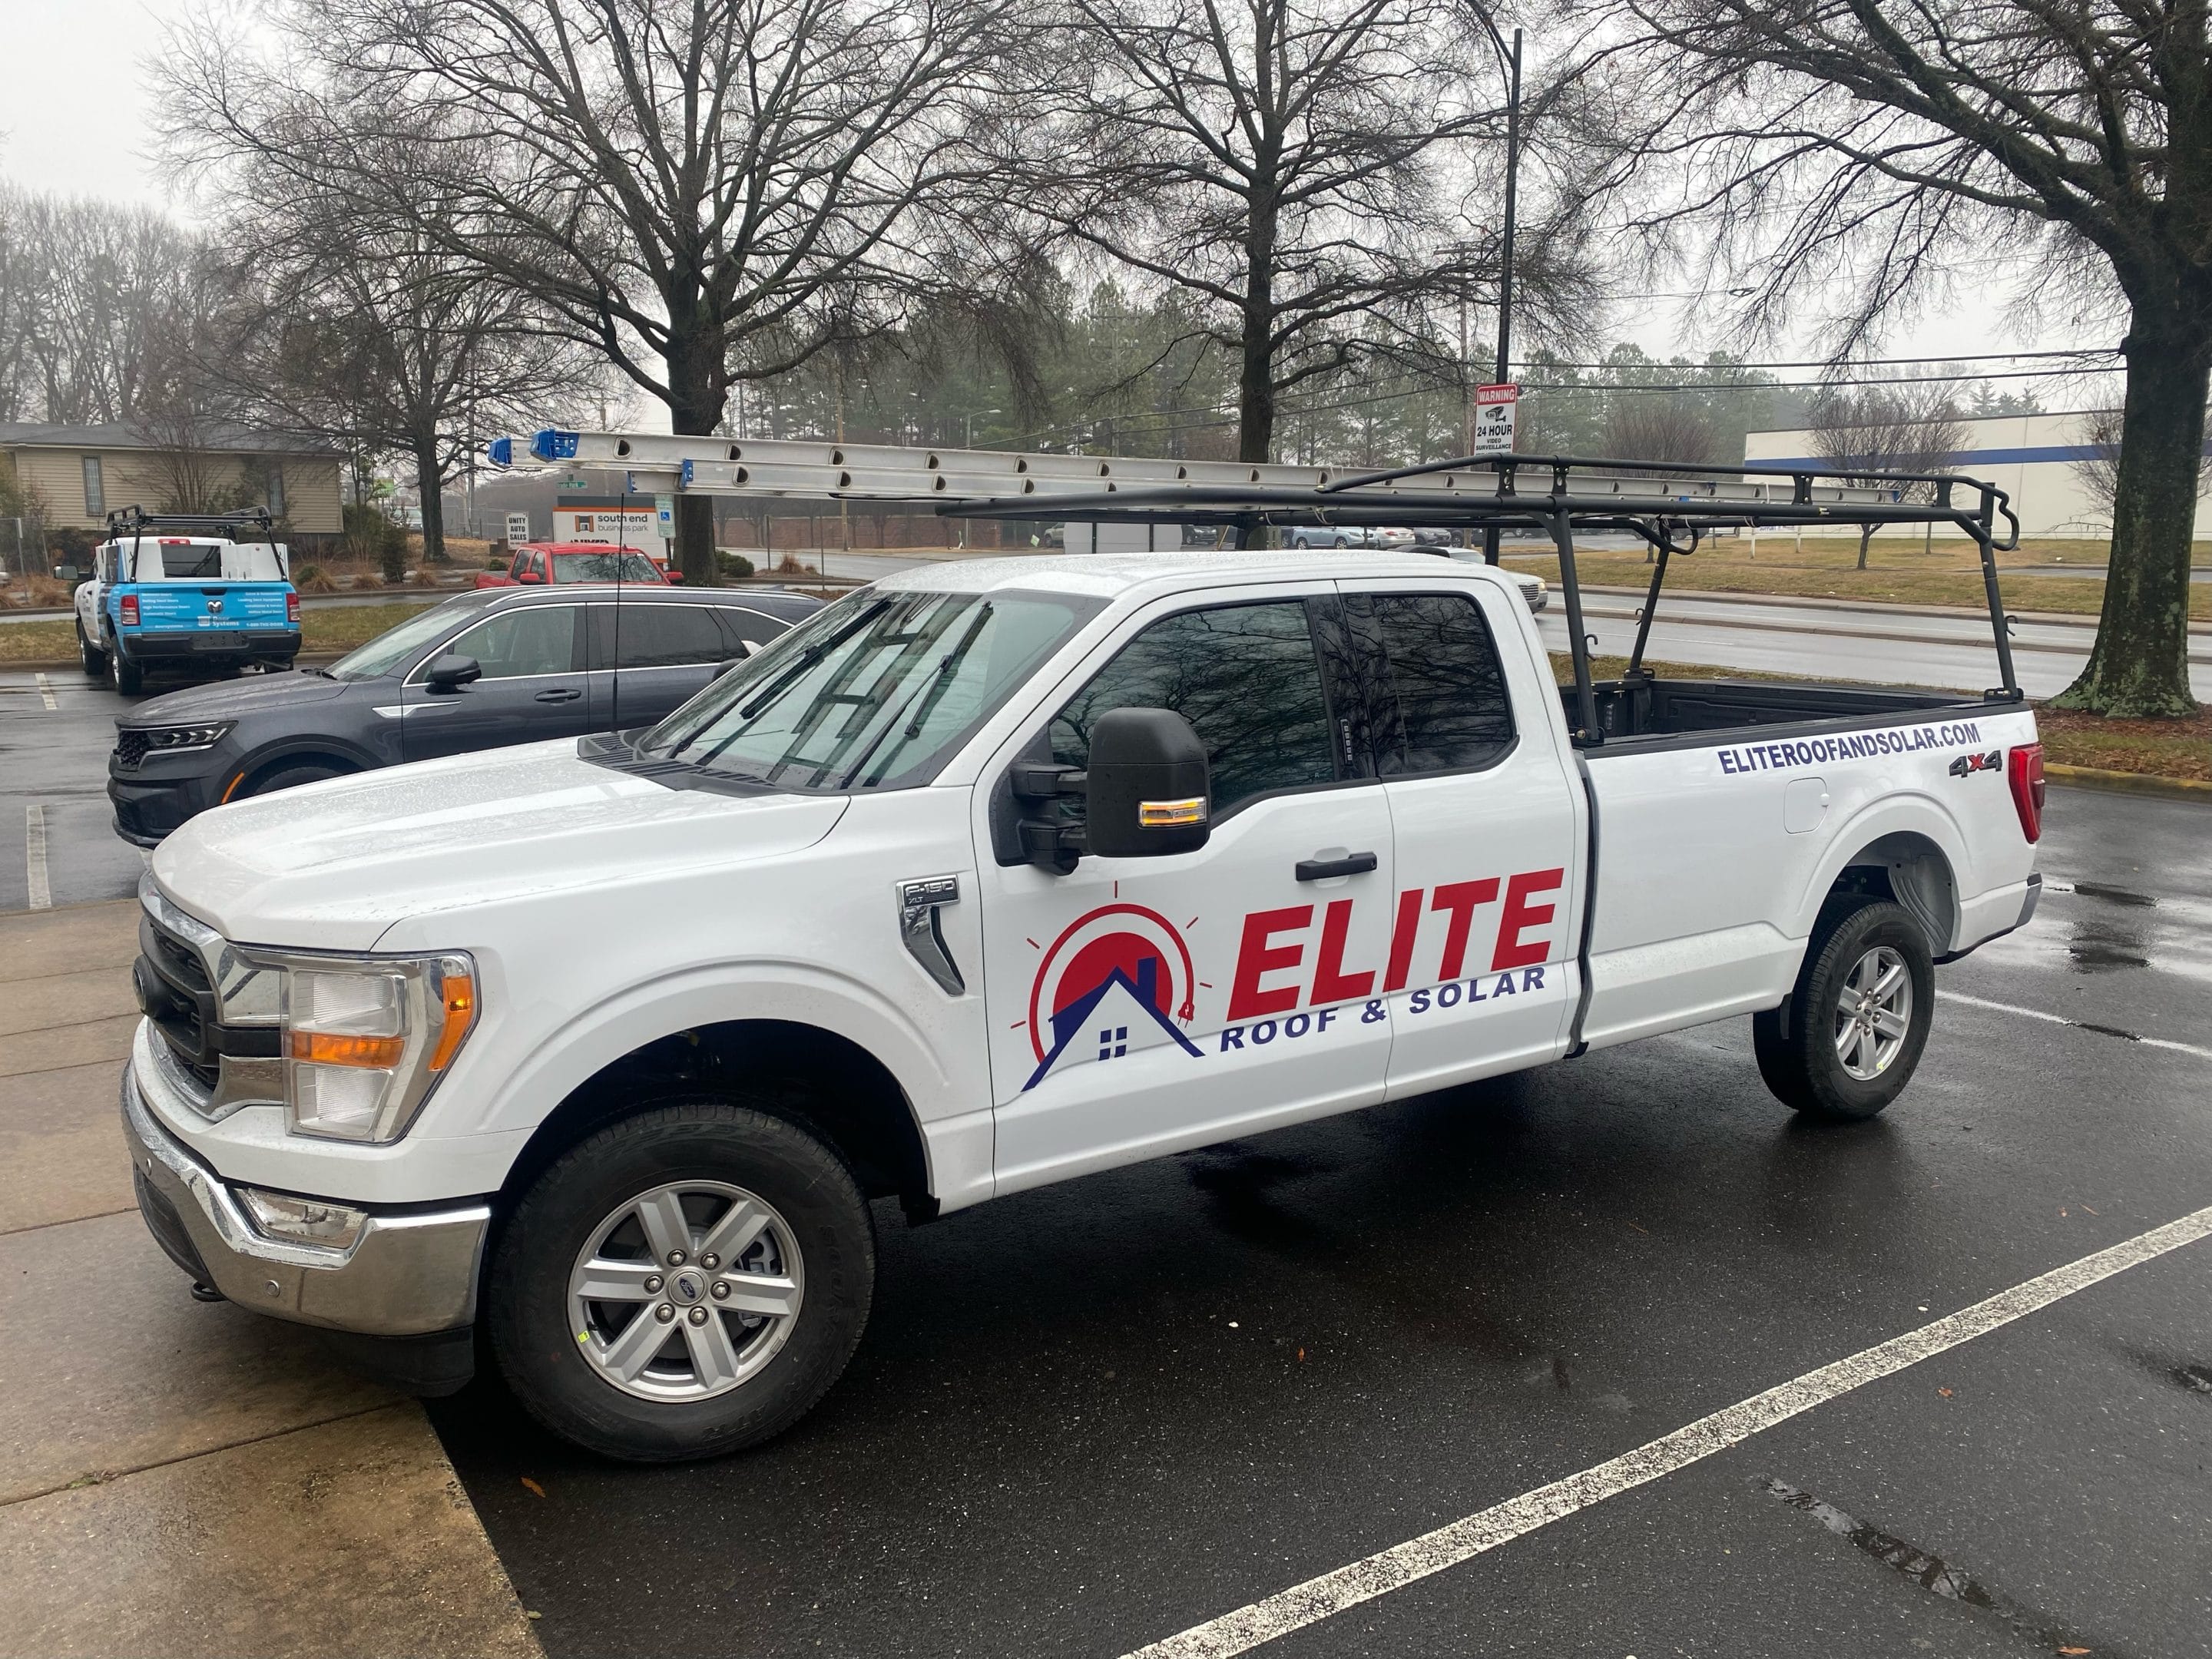 The Latest Edition to the Elite Roof & Solar Fleet - Our Dedicated Roof Repair 2022 F150 Truck!